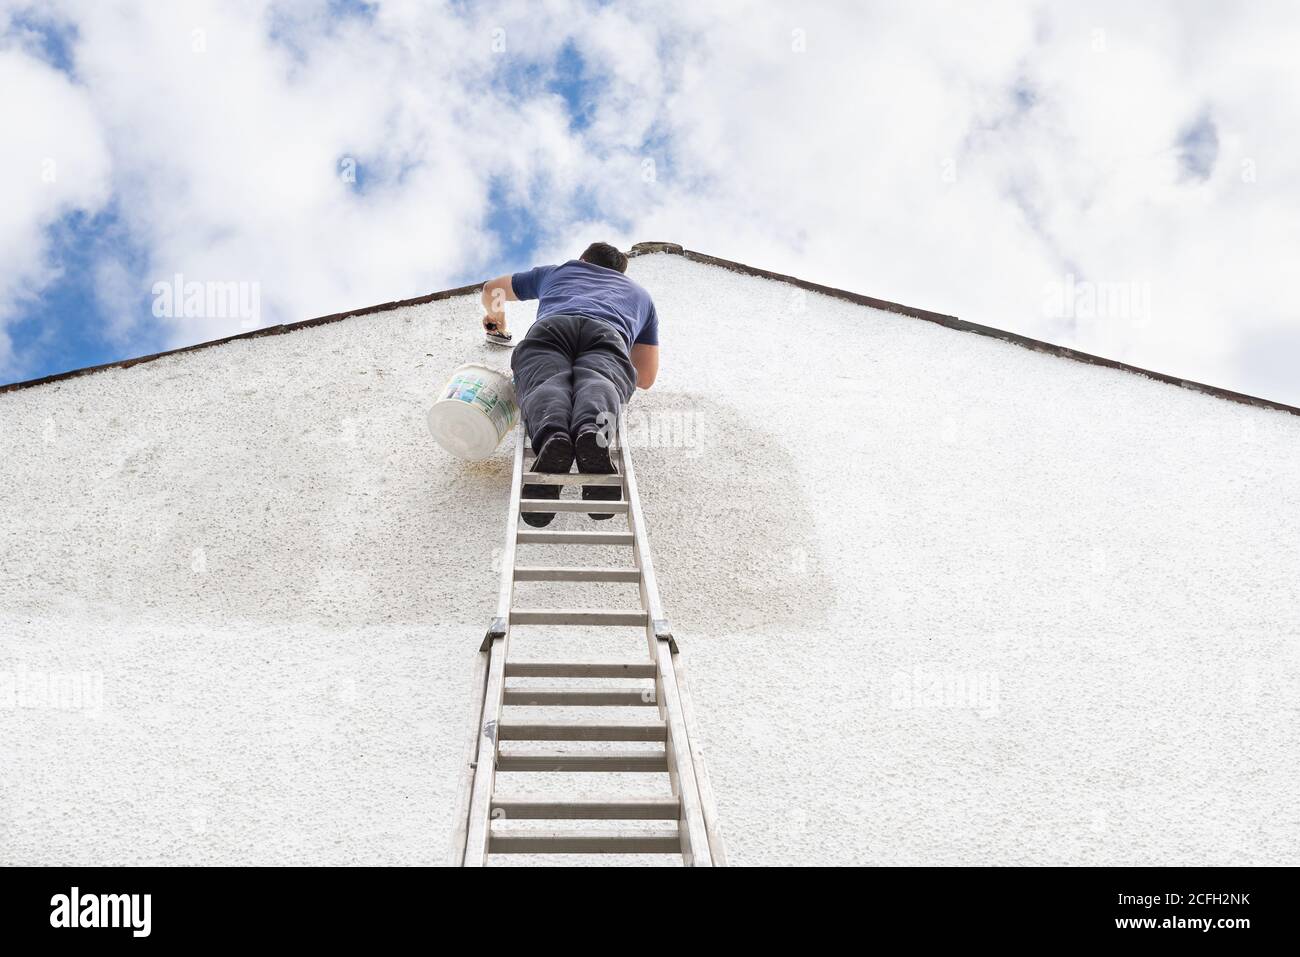 Man stands high up a ladder to paint the side of house a fresh white colour.  Stock Photo